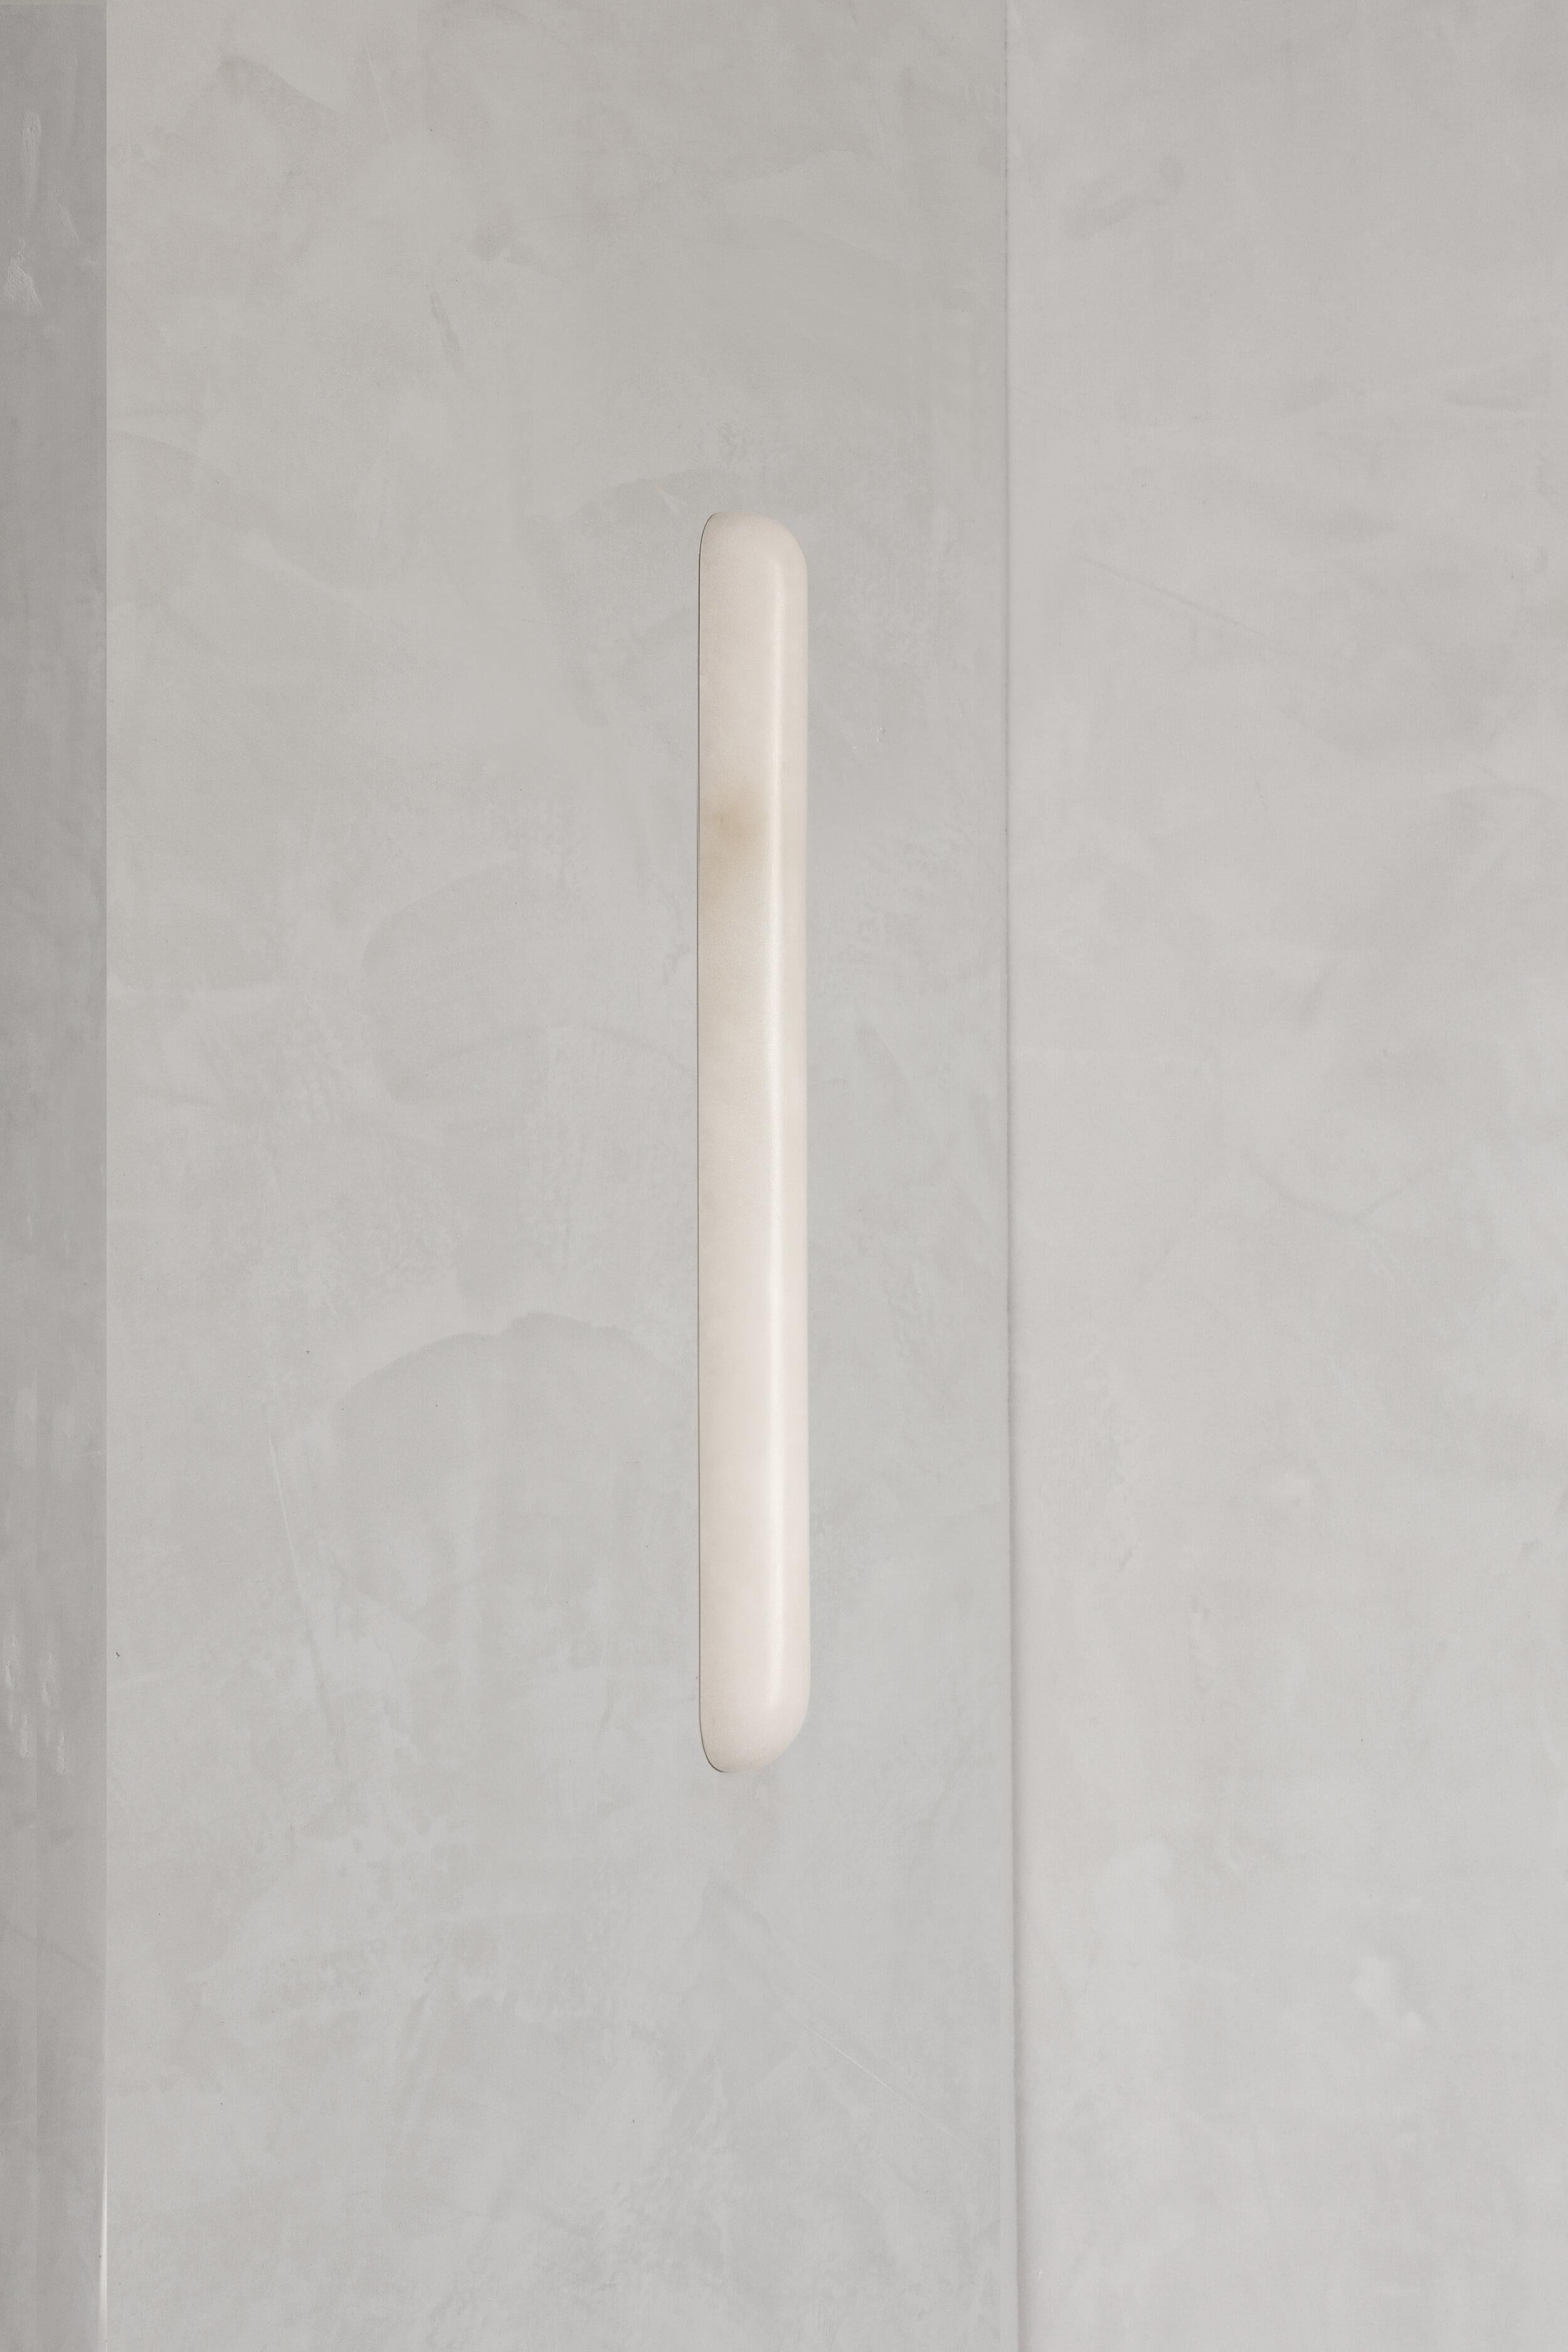 Tub 85 Alabaster wall light by Contain
Dimensions: D 4 x W 4 x H 85 cm.
Materials: Alabaster.
Also available in different dimensions. Please contact us.

All our lamps can be wired according to each country. If sold to the USA it will be wired